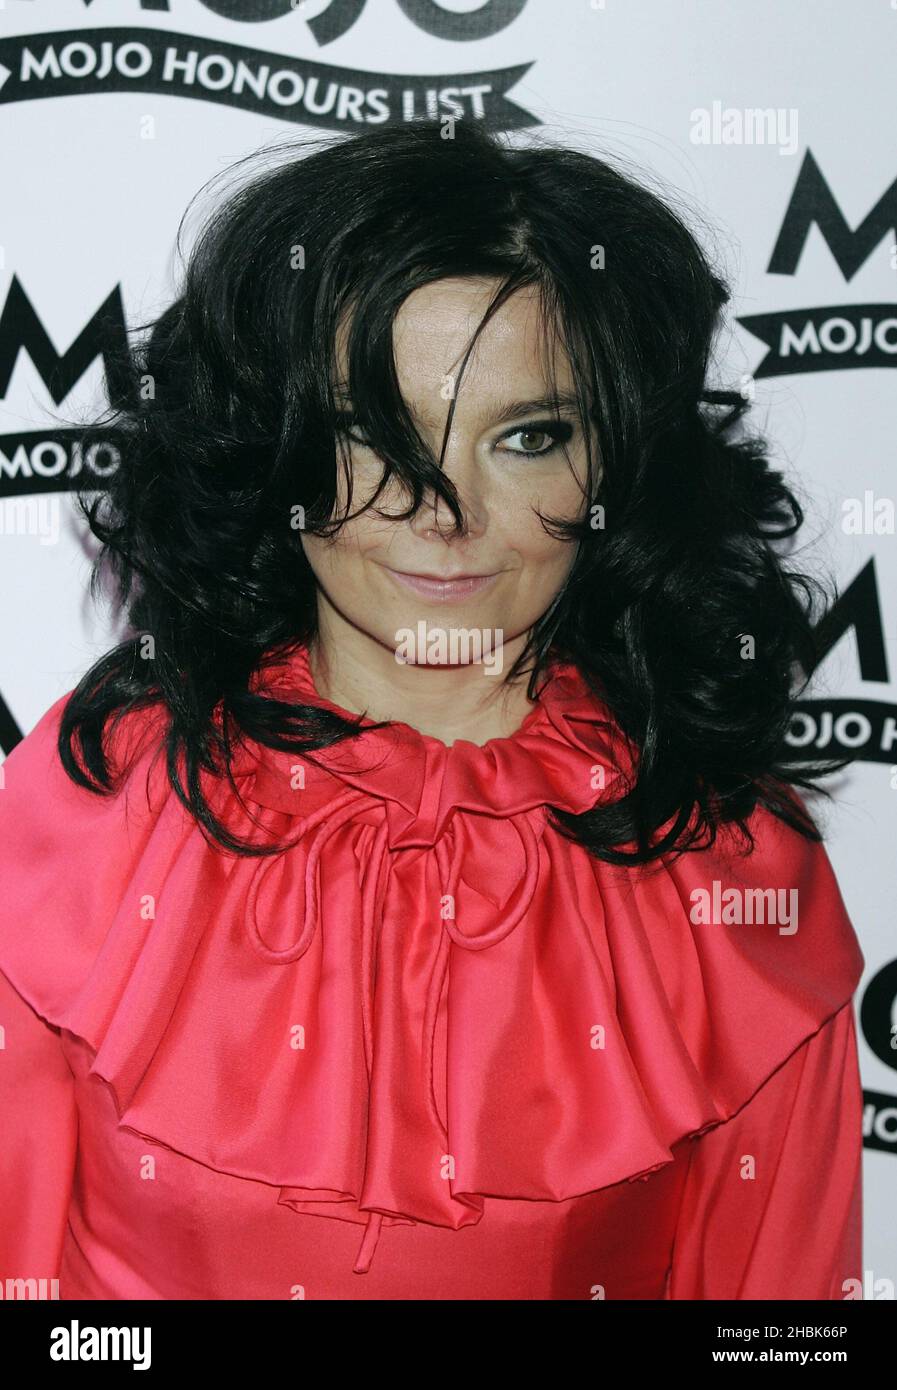 Bjork arrives for the Mojo Honours List award ceremony at The Brewery, east London. Stock Photo